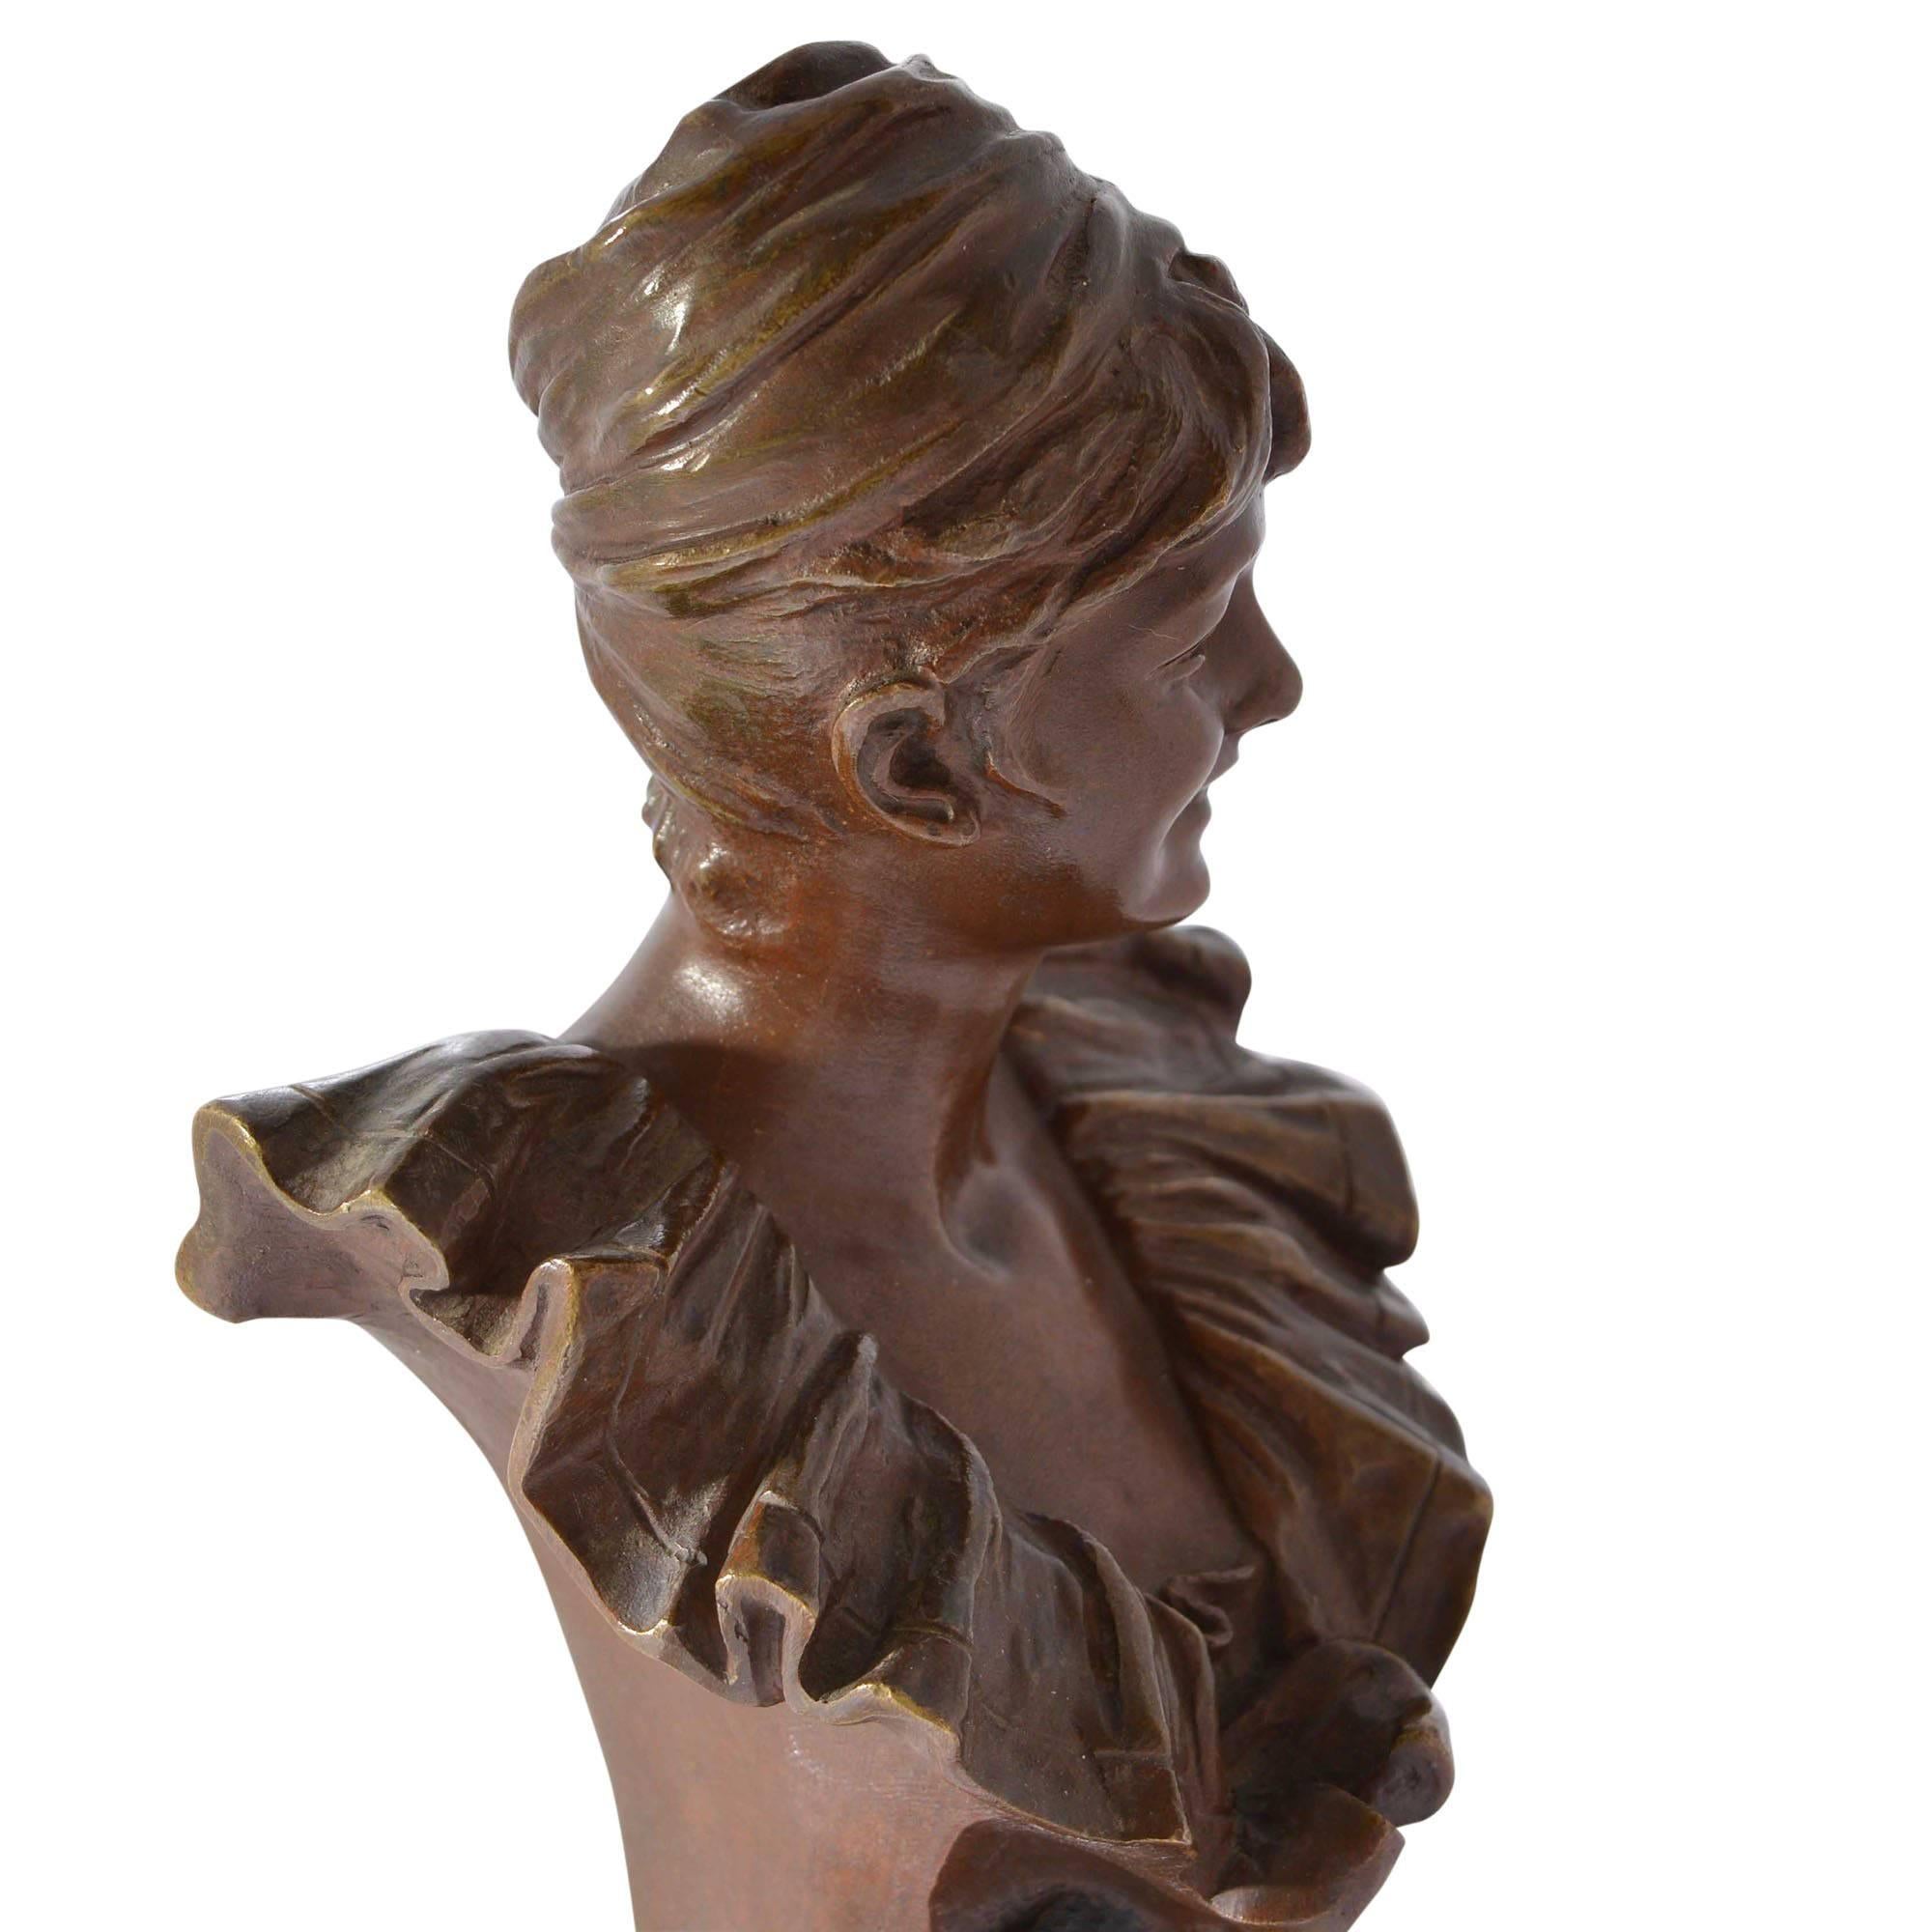 A cast by Societe des Bronzes de Paris from the model bust titled Pierrette by Belgian artist George Van der Straeten (1856-1928). This signed sculpture features a joyful young woman with a detailed ruffled collar top. Her hair is up and she wears a